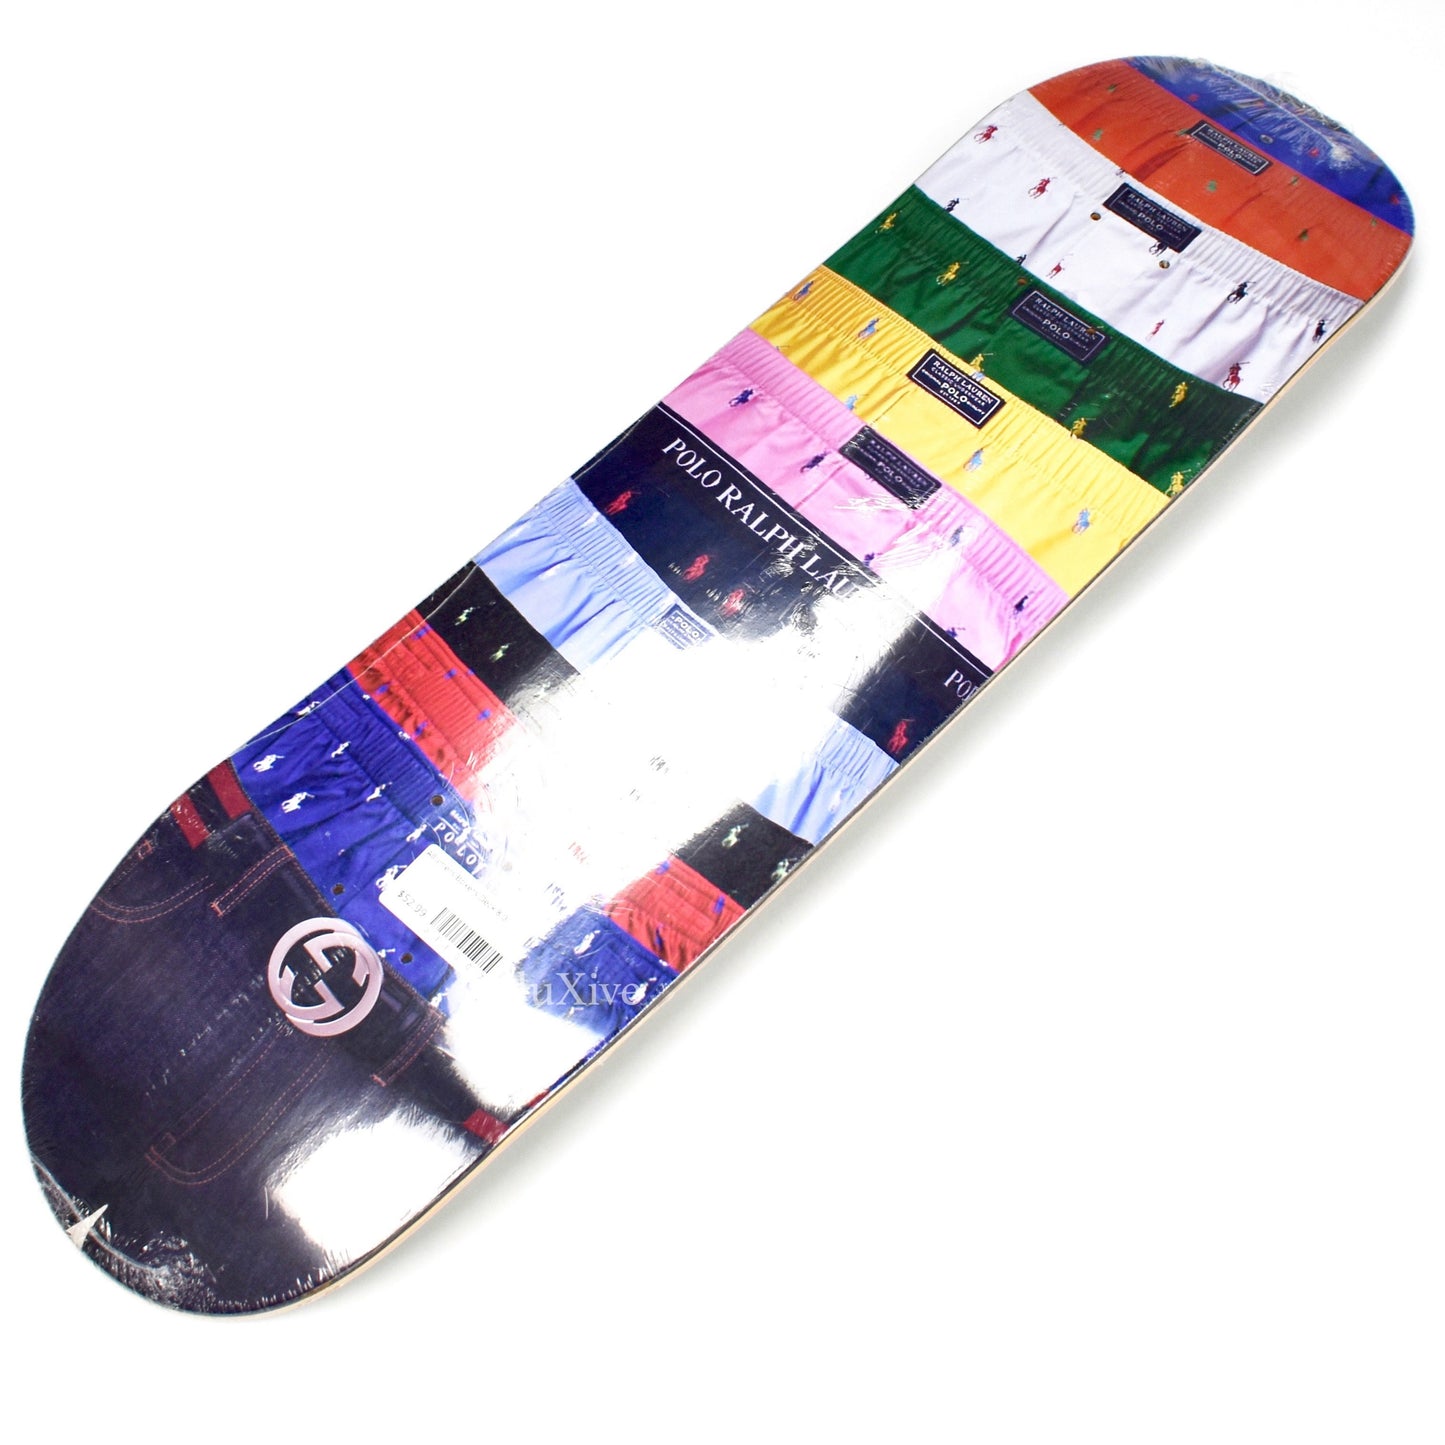 Alltimers - Polo Boxers Skate Deck